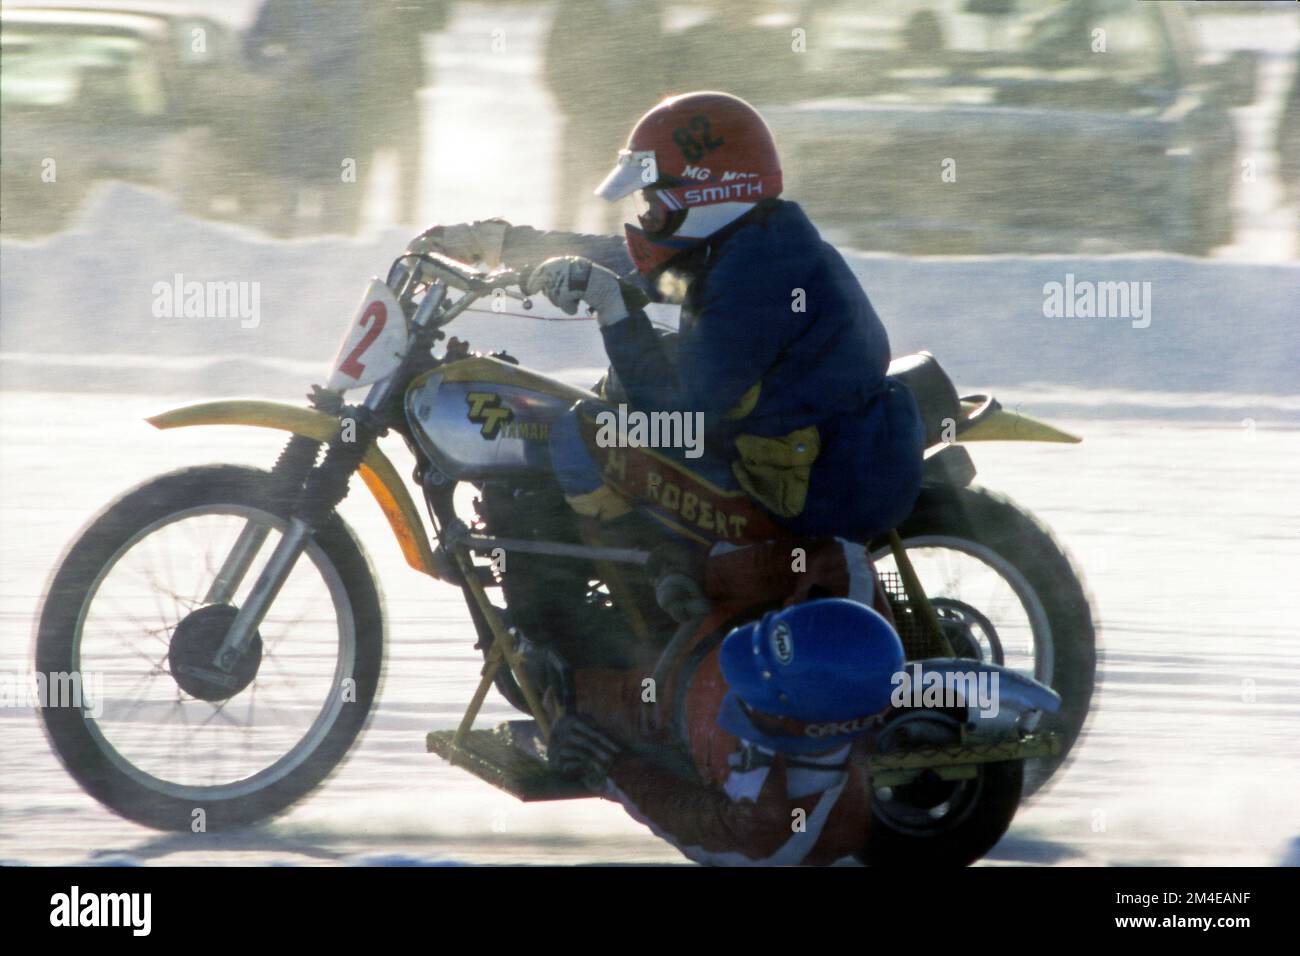 Motorcycle ice racer with a partner in the sidecar used to balance when cornering. Circa 1990 Stock Photo